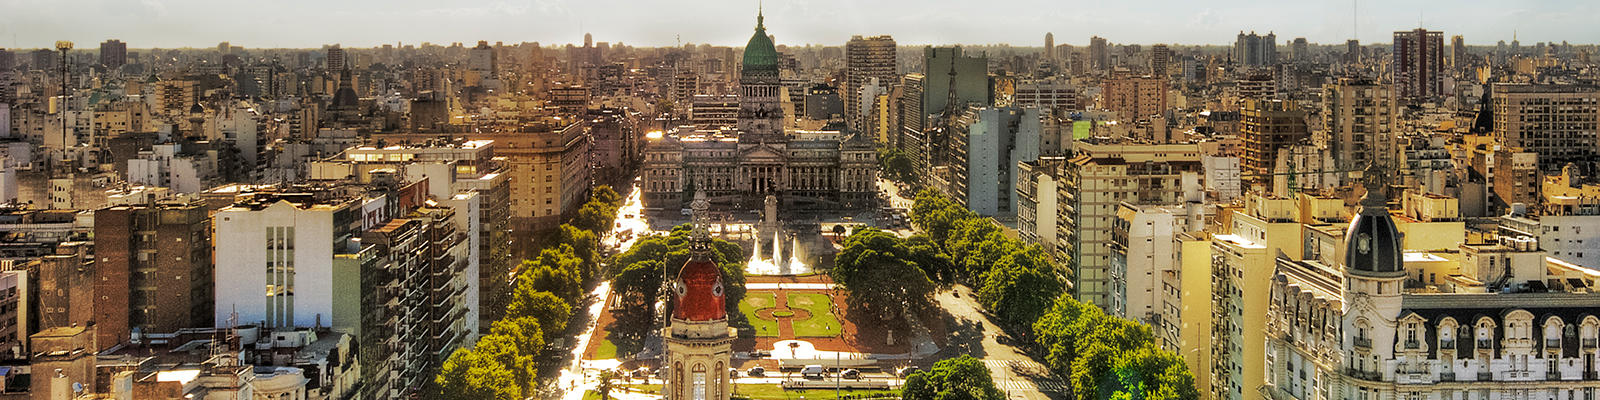 Buenos Aires inner city 